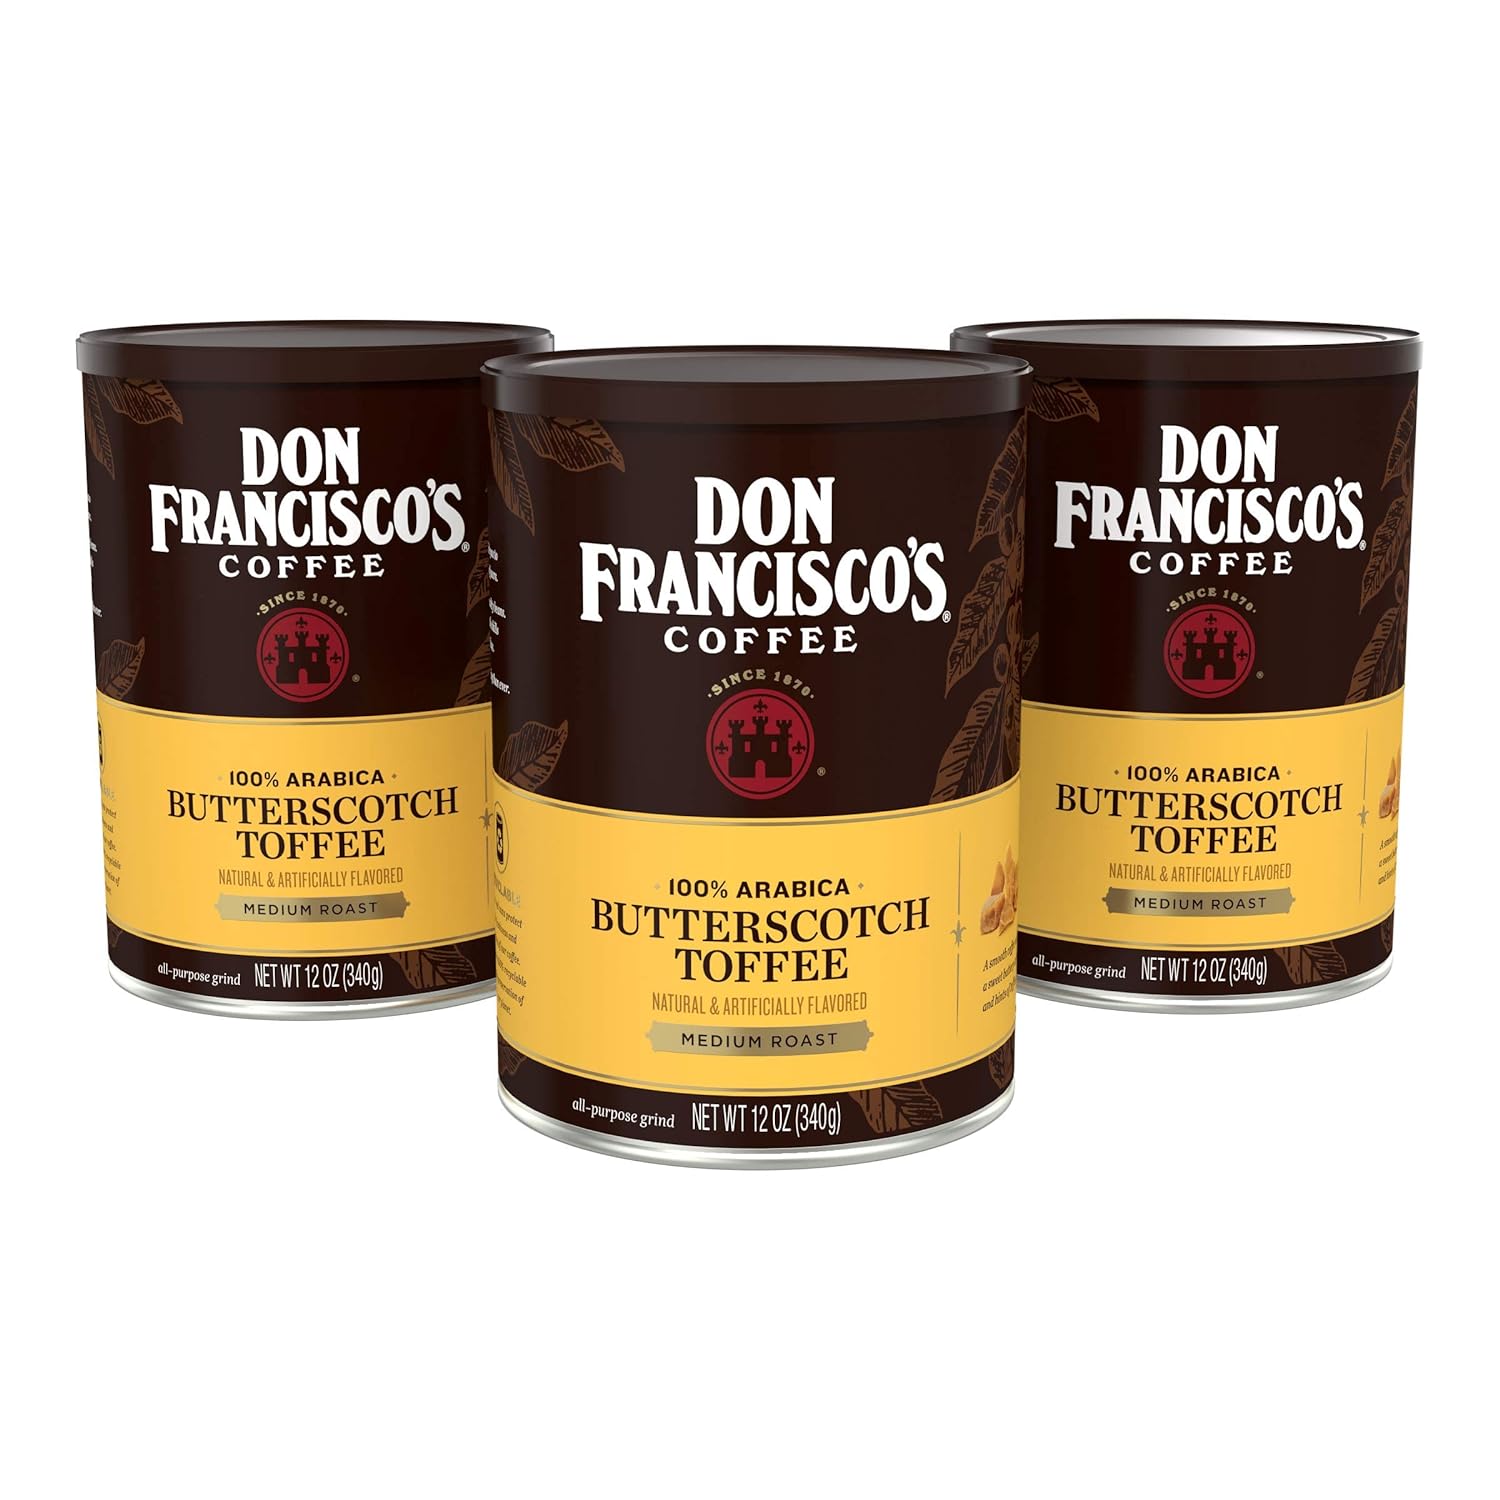 Don Francisco's Butterscotch Toffee Flavored Ground Coffee (3 x 12 oz Cans)